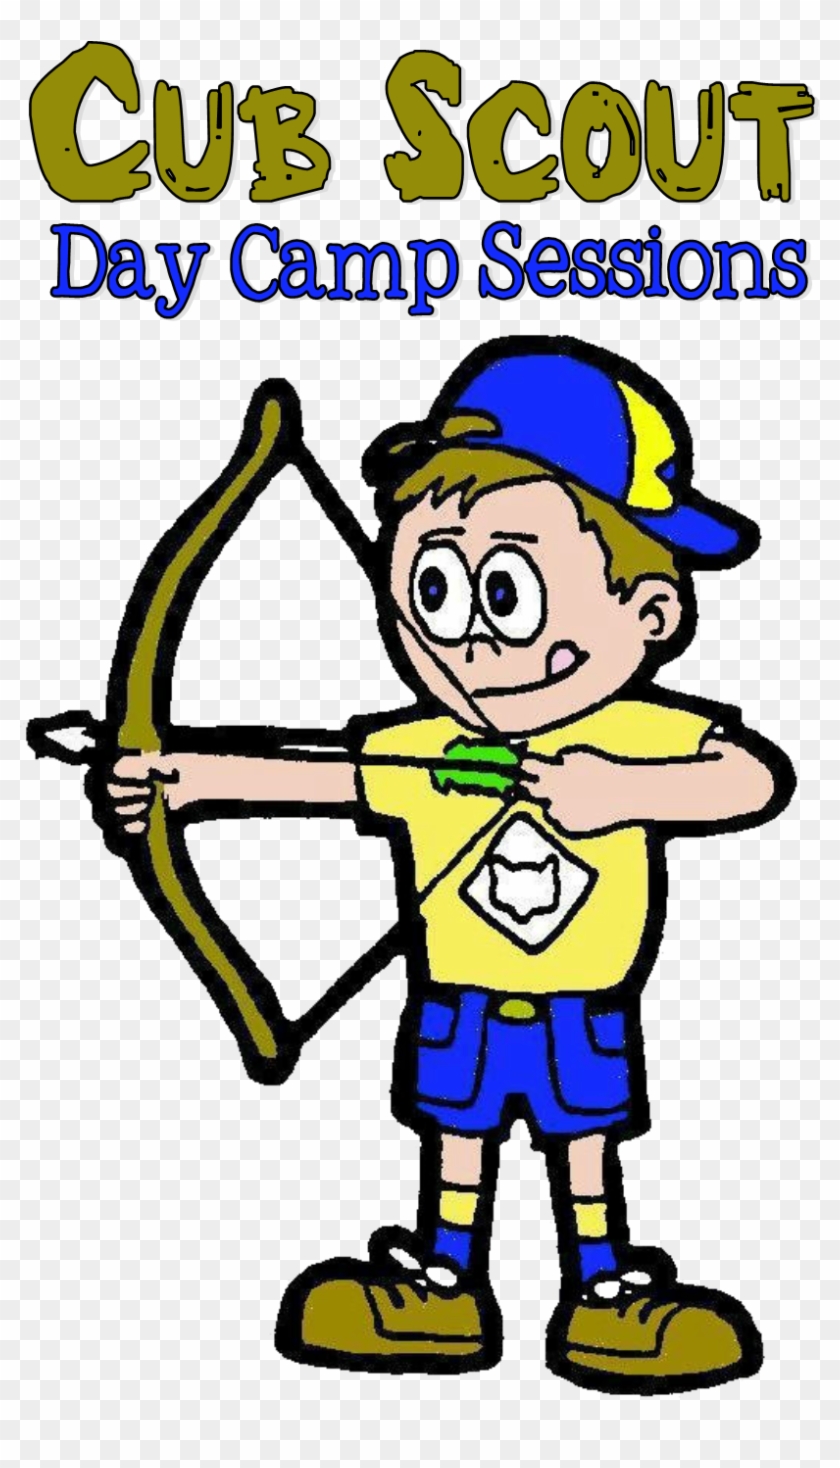 Scouts Boy Scouting, Scout Activities, Scout Camping, - Bow And Arrow Clipart #4682211